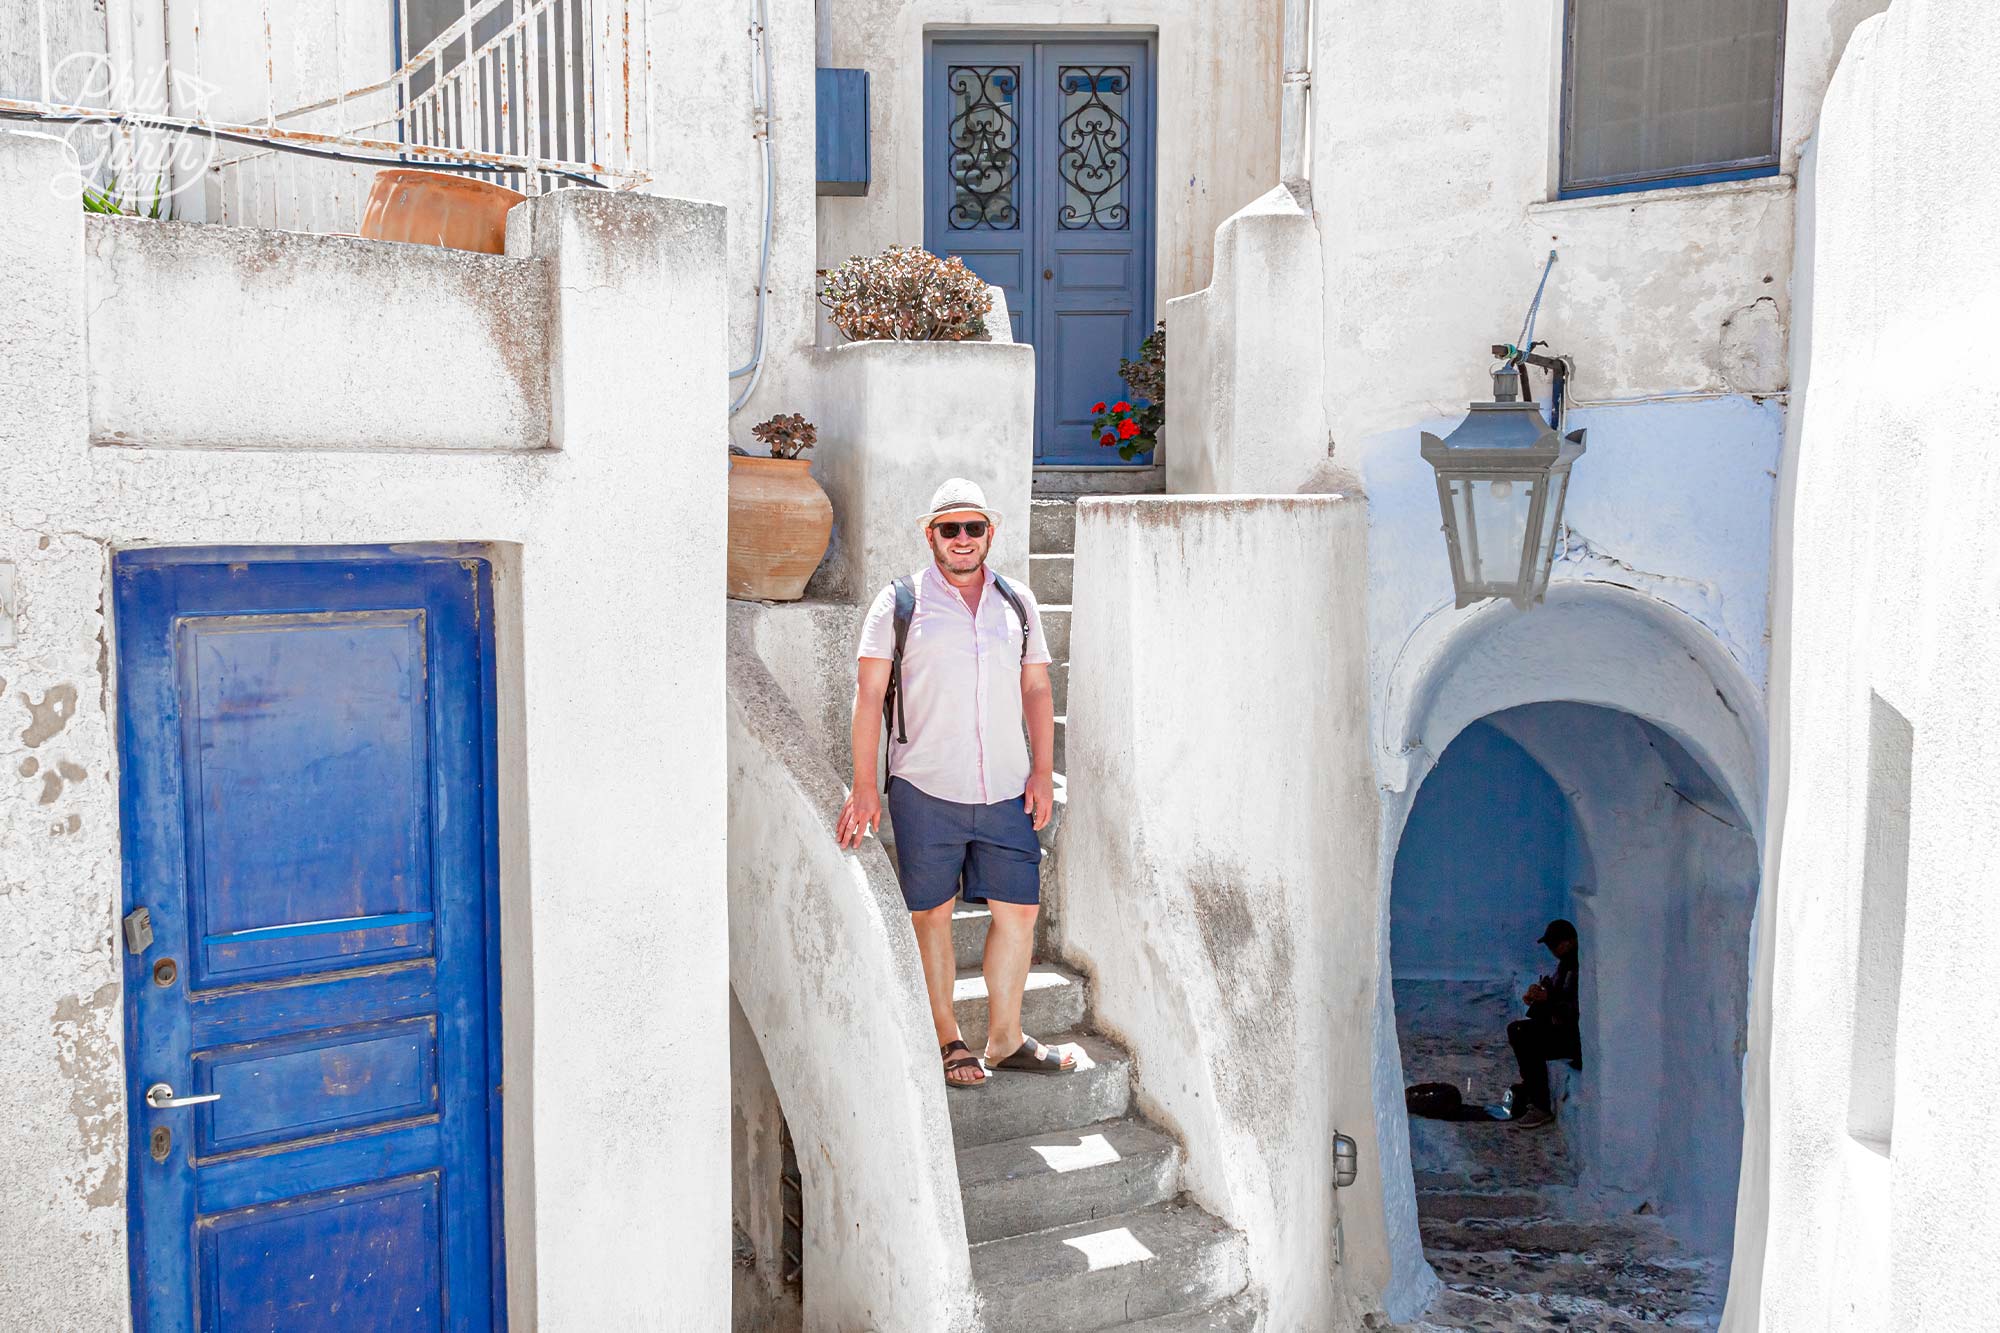 Our last Santorini Instagram spot is just before you reach the castle